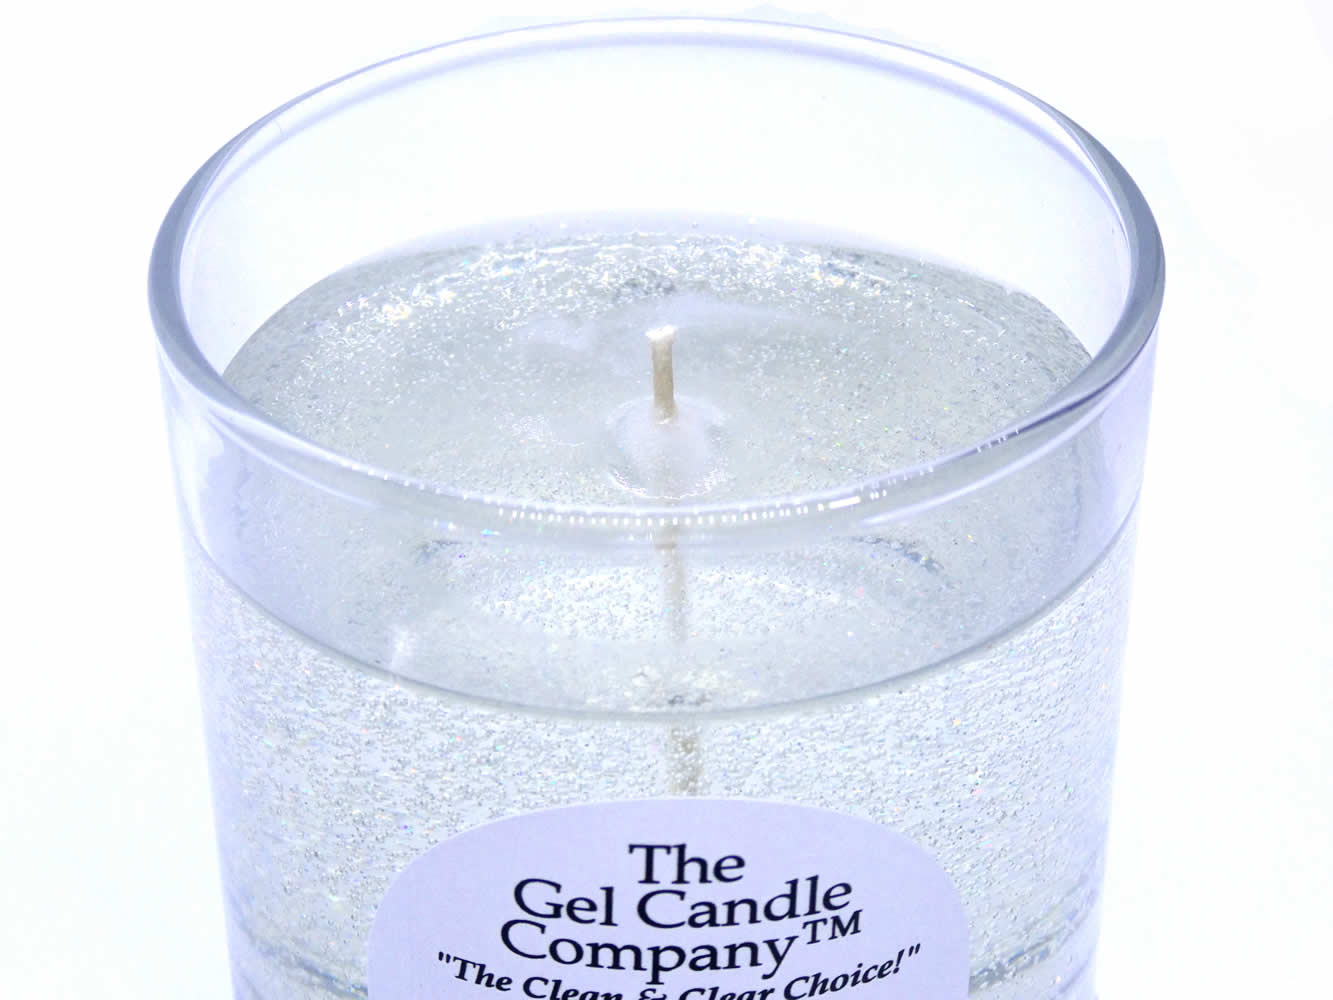 White Diamonds Scented Gel Candle up to 120 Hour Deco Jar - Click Image to Close